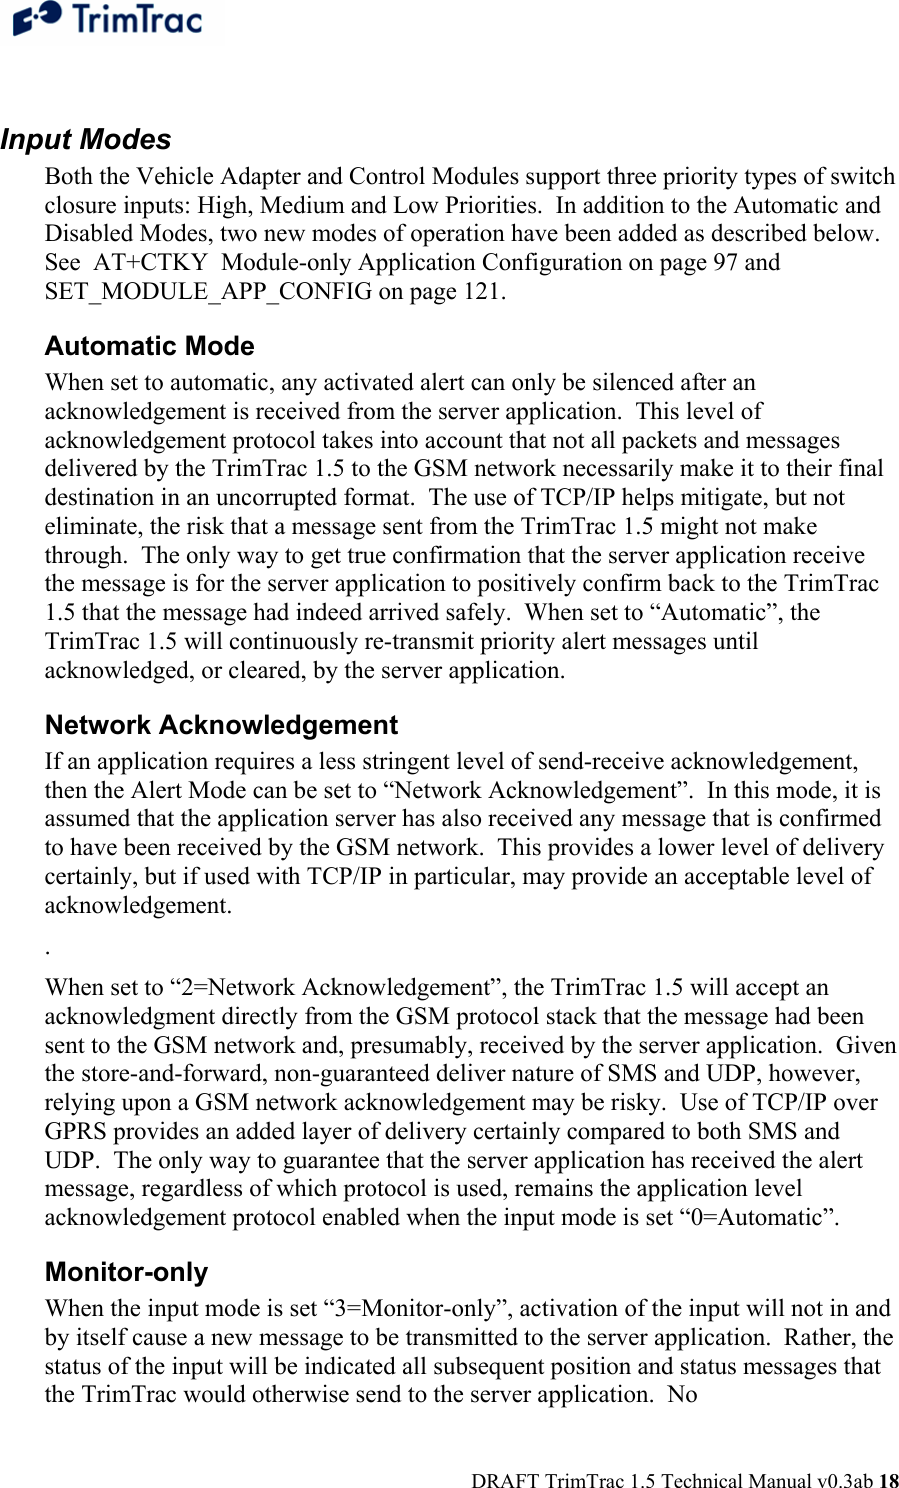  DRAFT TrimTrac 1.5 Technical Manual v0.3ab 18  Input Modes Both the Vehicle Adapter and Control Modules support three priority types of switch closure inputs: High, Medium and Low Priorities.  In addition to the Automatic and Disabled Modes, two new modes of operation have been added as described below.  See  AT+CTKY  Module-only Application Configuration on page 97 and SET_MODULE_APP_CONFIG on page 121. Automatic Mode When set to automatic, any activated alert can only be silenced after an acknowledgement is received from the server application.  This level of acknowledgement protocol takes into account that not all packets and messages delivered by the TrimTrac 1.5 to the GSM network necessarily make it to their final destination in an uncorrupted format.  The use of TCP/IP helps mitigate, but not eliminate, the risk that a message sent from the TrimTrac 1.5 might not make through.  The only way to get true confirmation that the server application receive the message is for the server application to positively confirm back to the TrimTrac 1.5 that the message had indeed arrived safely.  When set to “Automatic”, the TrimTrac 1.5 will continuously re-transmit priority alert messages until acknowledged, or cleared, by the server application. Network Acknowledgement If an application requires a less stringent level of send-receive acknowledgement, then the Alert Mode can be set to “Network Acknowledgement”.  In this mode, it is assumed that the application server has also received any message that is confirmed to have been received by the GSM network.  This provides a lower level of delivery certainly, but if used with TCP/IP in particular, may provide an acceptable level of acknowledgement. .   When set to “2=Network Acknowledgement”, the TrimTrac 1.5 will accept an acknowledgment directly from the GSM protocol stack that the message had been sent to the GSM network and, presumably, received by the server application.  Given the store-and-forward, non-guaranteed deliver nature of SMS and UDP, however, relying upon a GSM network acknowledgement may be risky.  Use of TCP/IP over GPRS provides an added layer of delivery certainly compared to both SMS and UDP.  The only way to guarantee that the server application has received the alert message, regardless of which protocol is used, remains the application level acknowledgement protocol enabled when the input mode is set “0=Automatic”. Monitor-only When the input mode is set “3=Monitor-only”, activation of the input will not in and by itself cause a new message to be transmitted to the server application.  Rather, the status of the input will be indicated all subsequent position and status messages that the TrimTrac would otherwise send to the server application.  No 